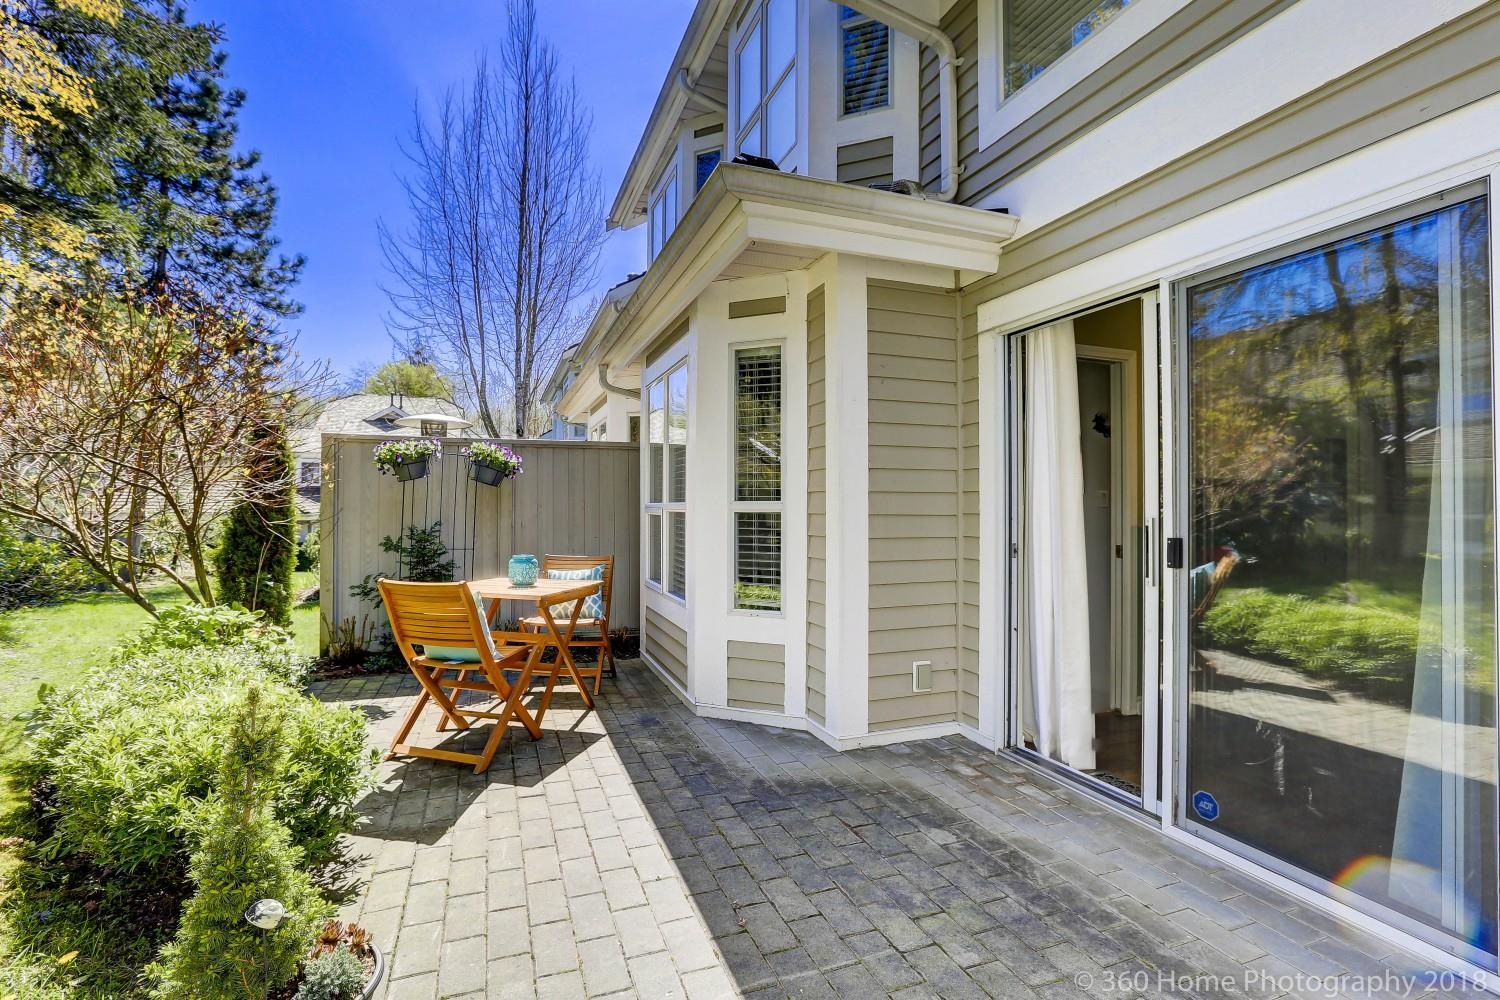 Listing image of 34 650 ROCHE POINT DRIVE